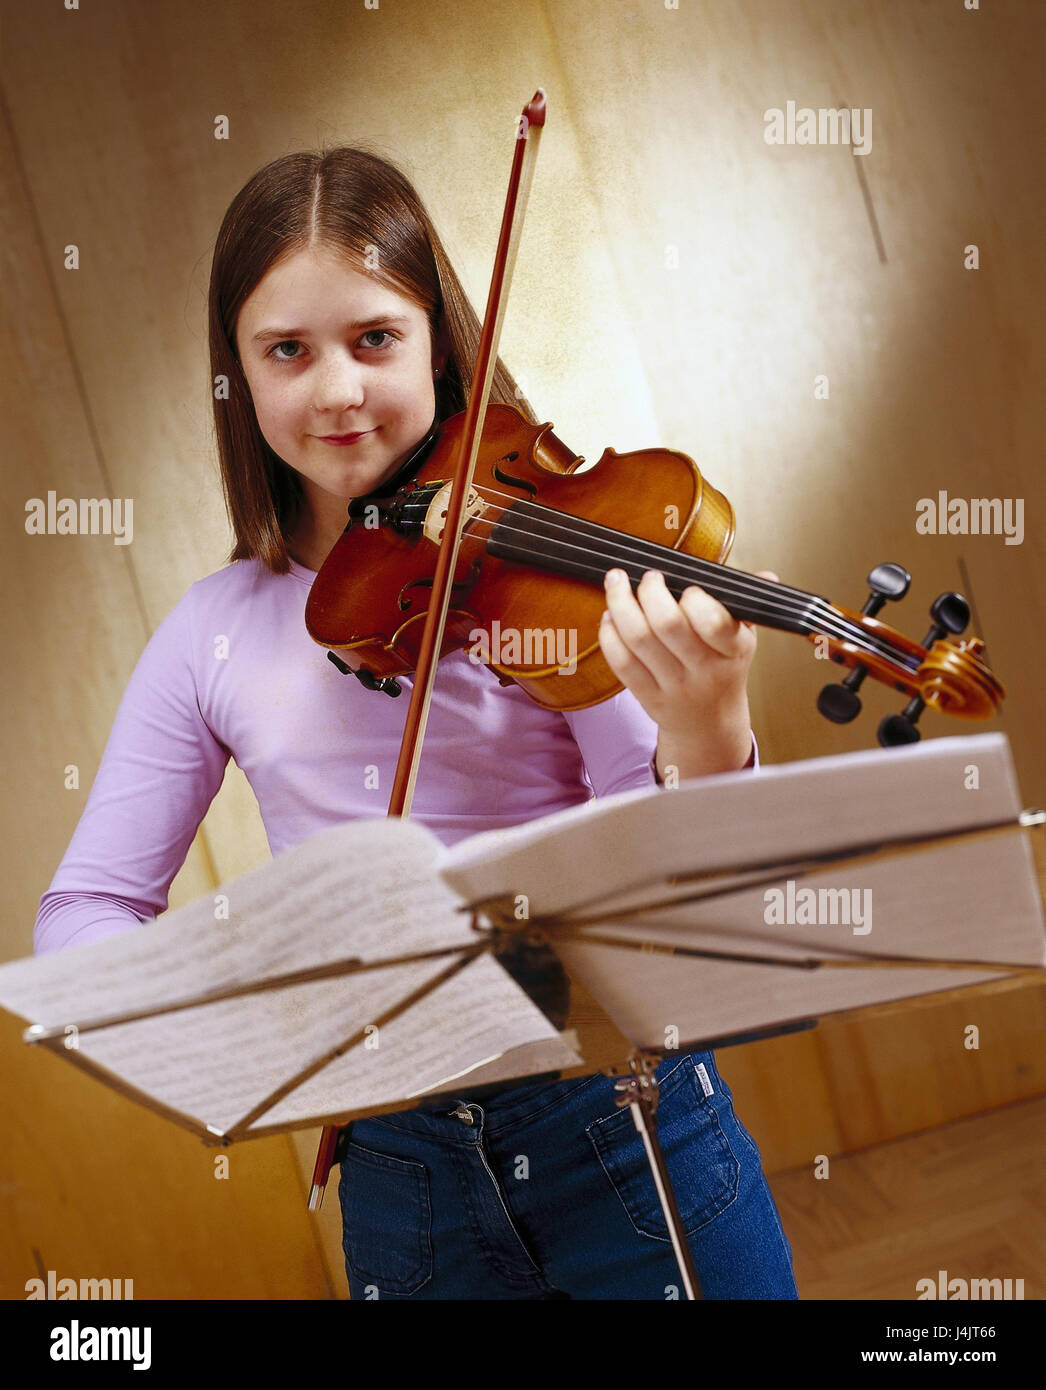 Girls, make music, practice violin, music stand inside, child, musician, music, violinist, musical instrument, violin, stringed instrument, stringed instrument, learn Stock Photo